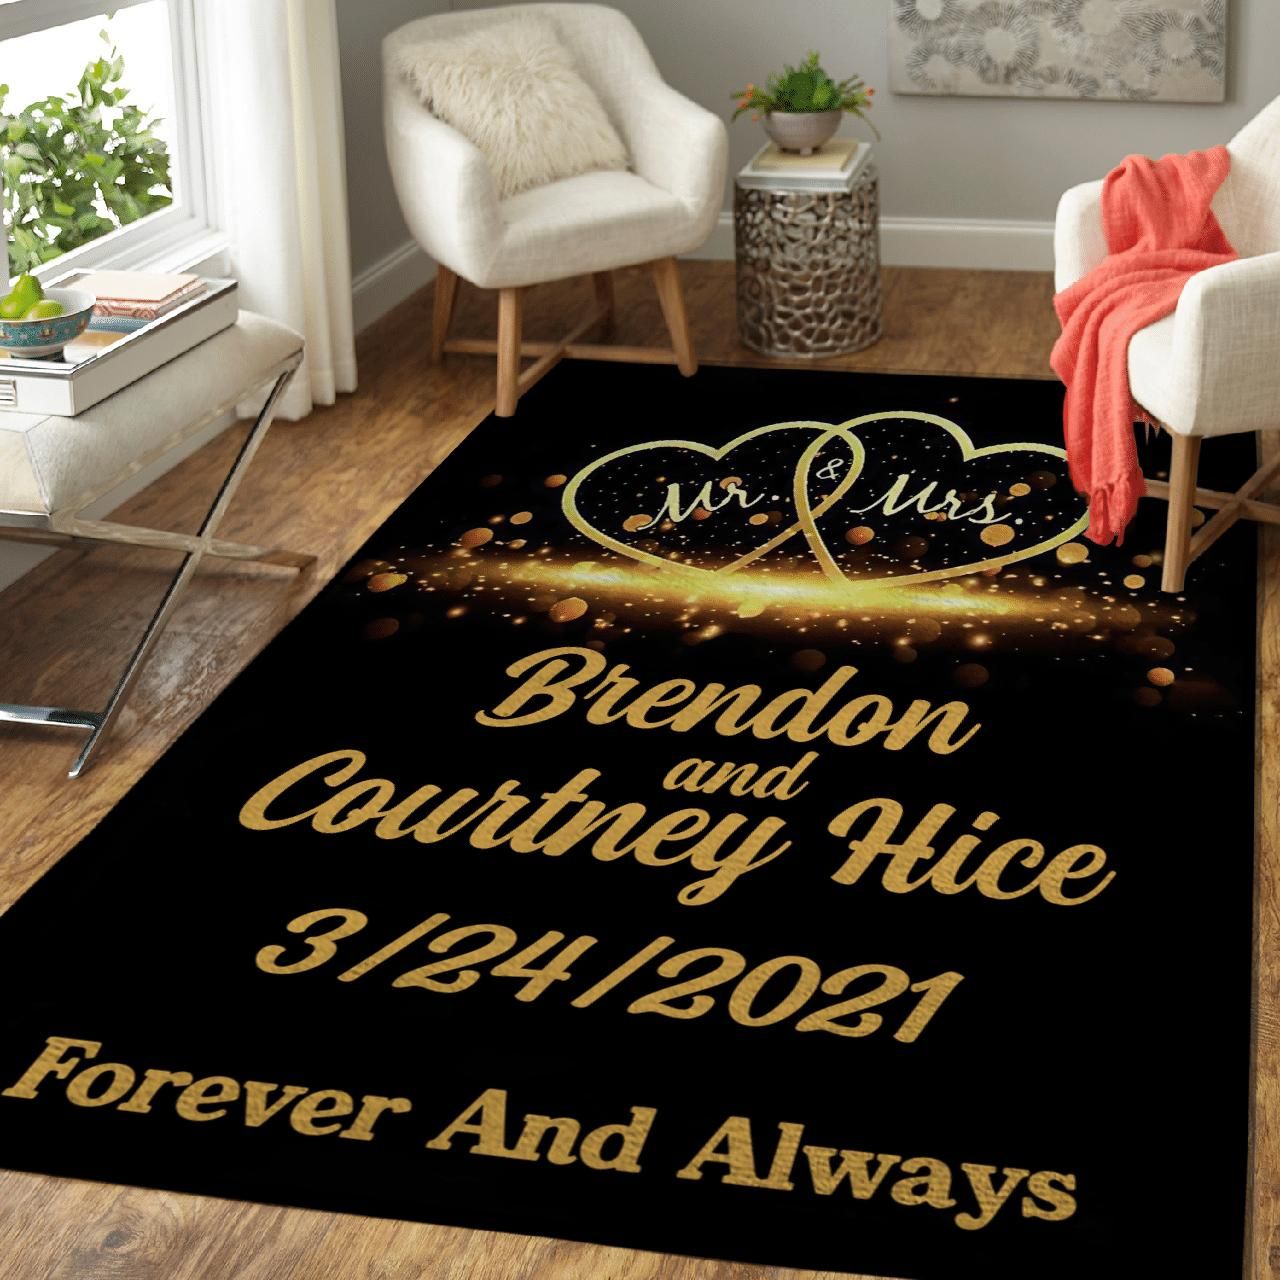 Mr And Mrs Anderson Forever And Always Custom Text Name And Year Brendon And Courtney Hice; 3242021 Area Rug